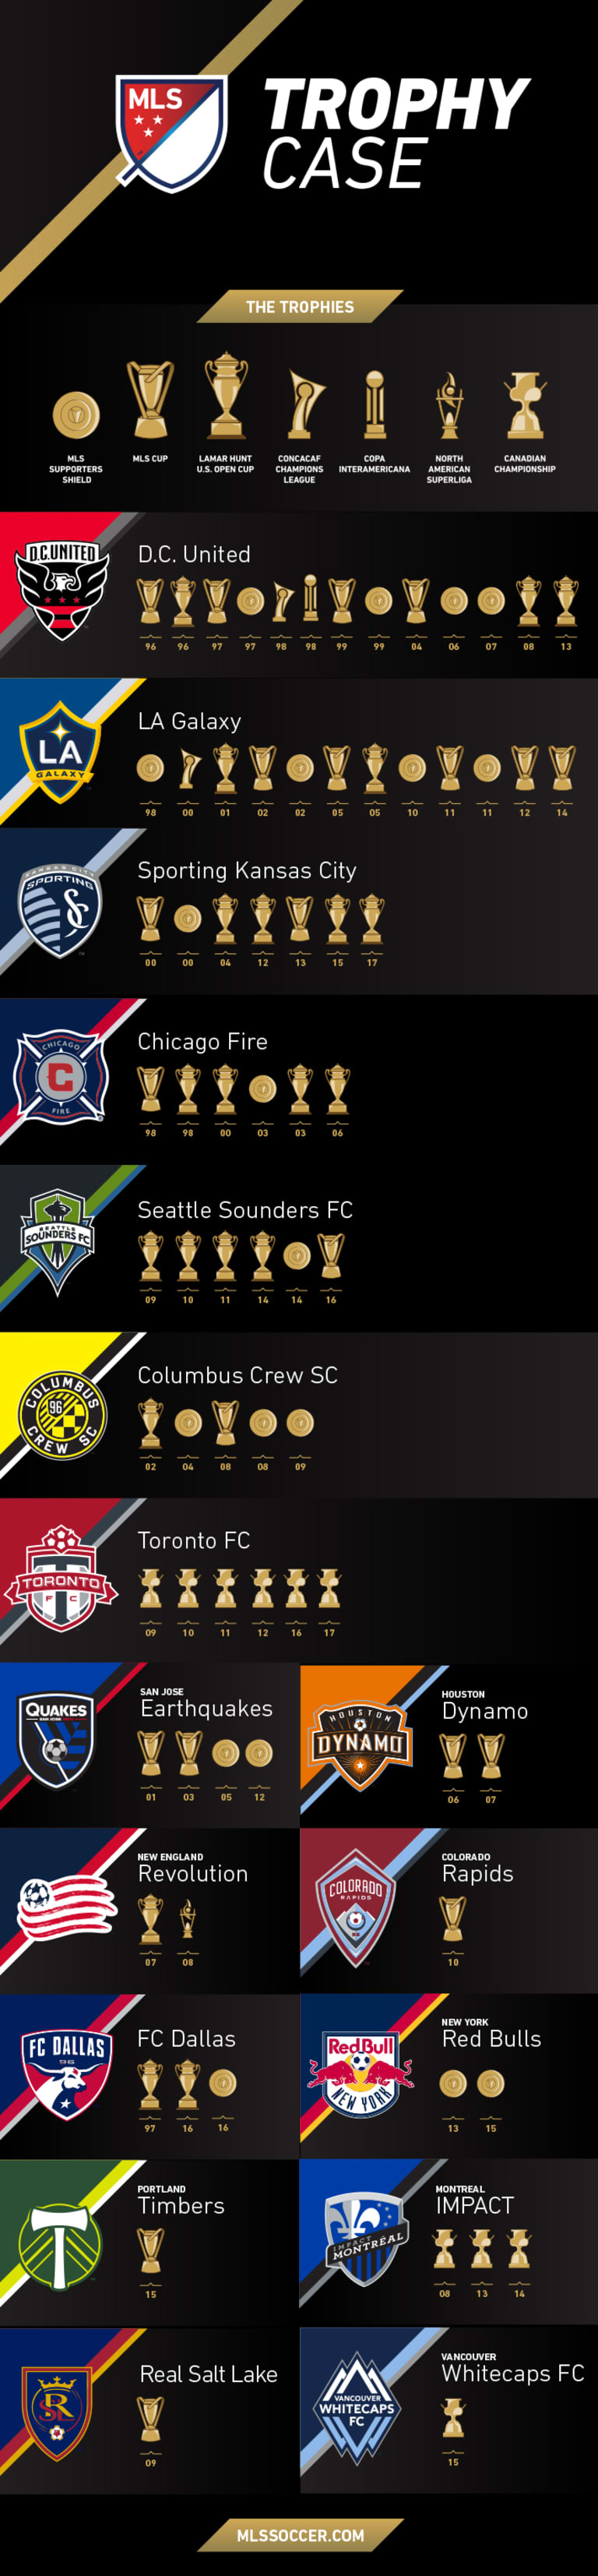 How every team's trophy case looks after Sporting KC US Open Cup win - https://league-mp7static.mlsdigital.net/images/MLS-Trophy-Case-9-22-17.jpg?vfUdwj48ngG0BCux6SVexdPyLTe9SEEc